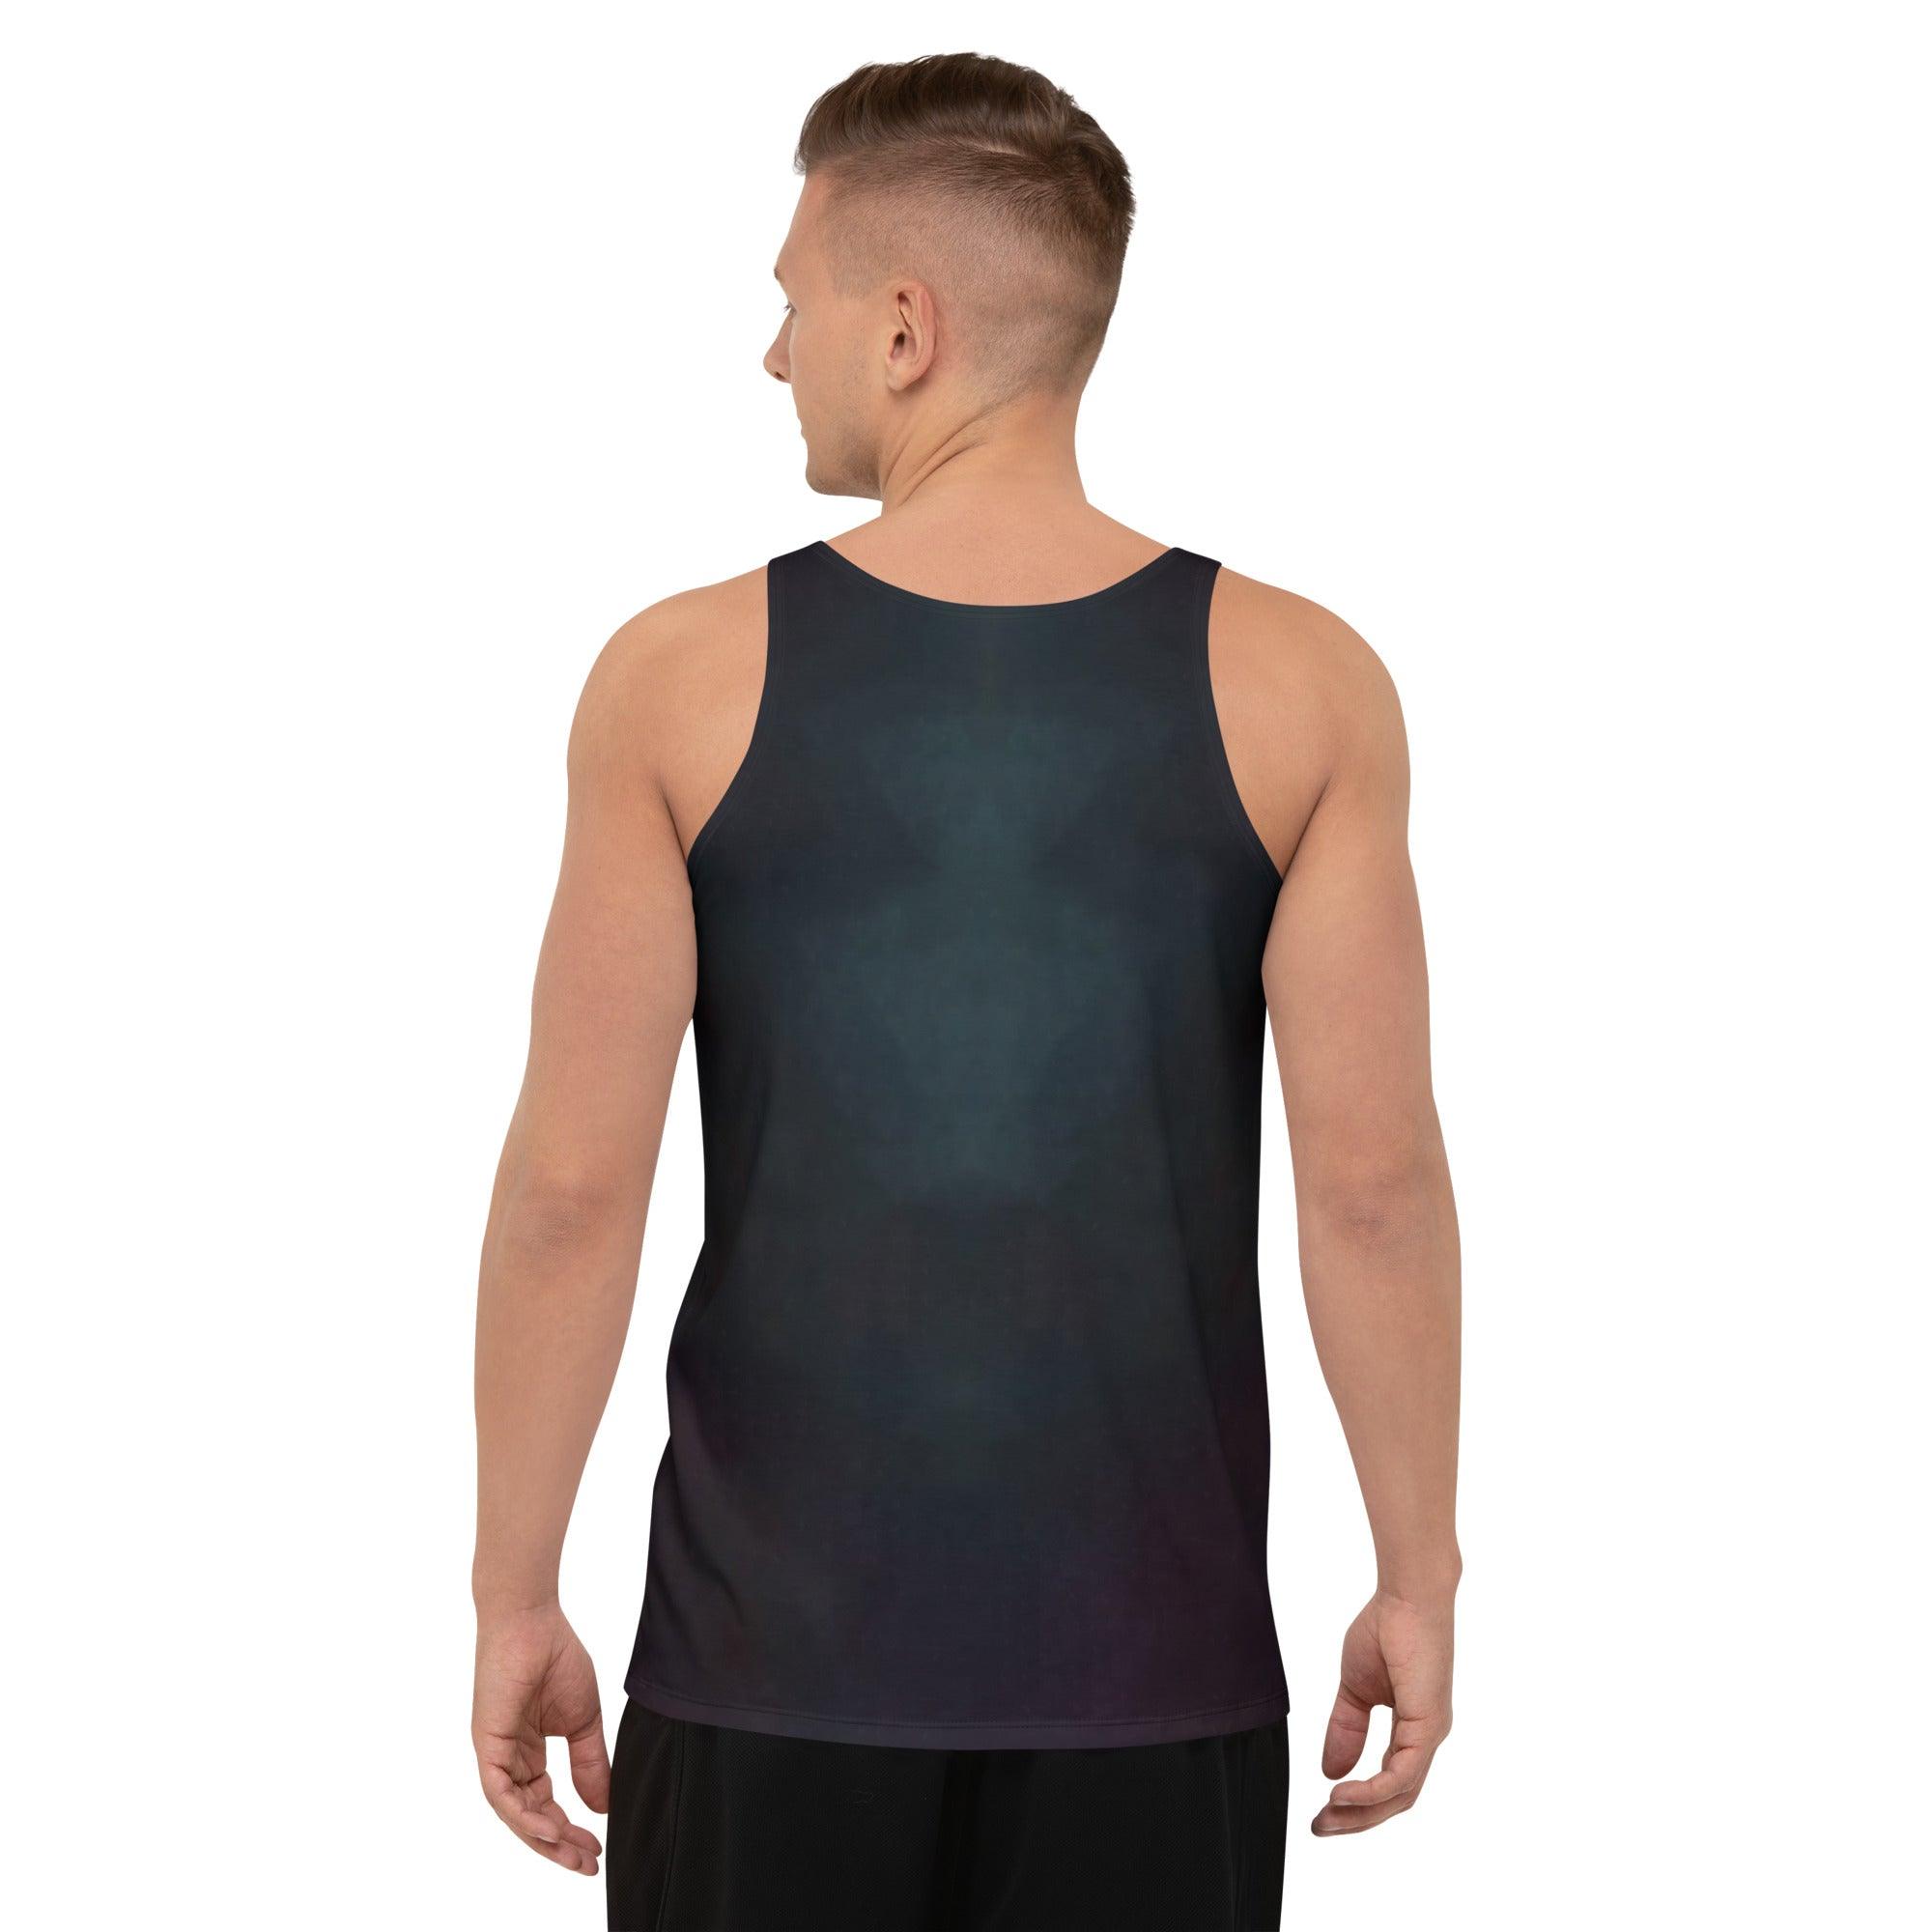 NS 862 Tank Top in casual outdoor setting.